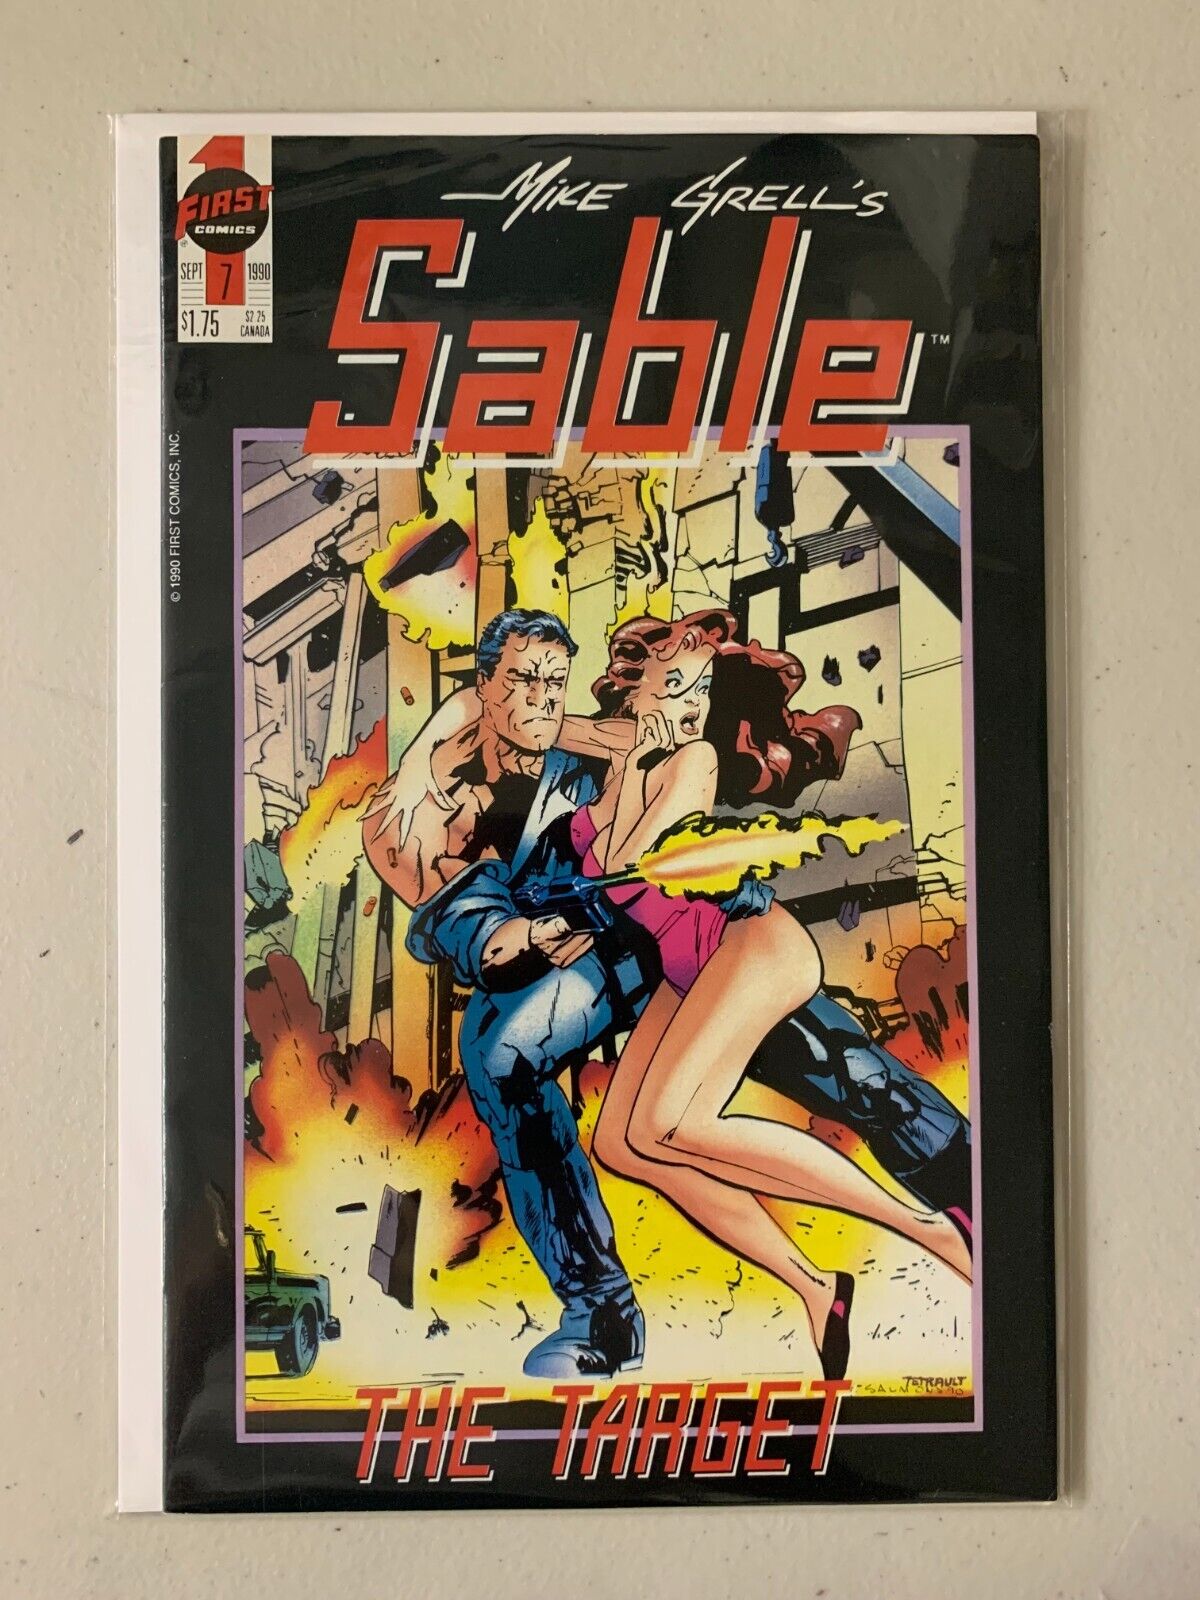 Mike Grell\'s Sable #7 First Comics 6.0 (1990)